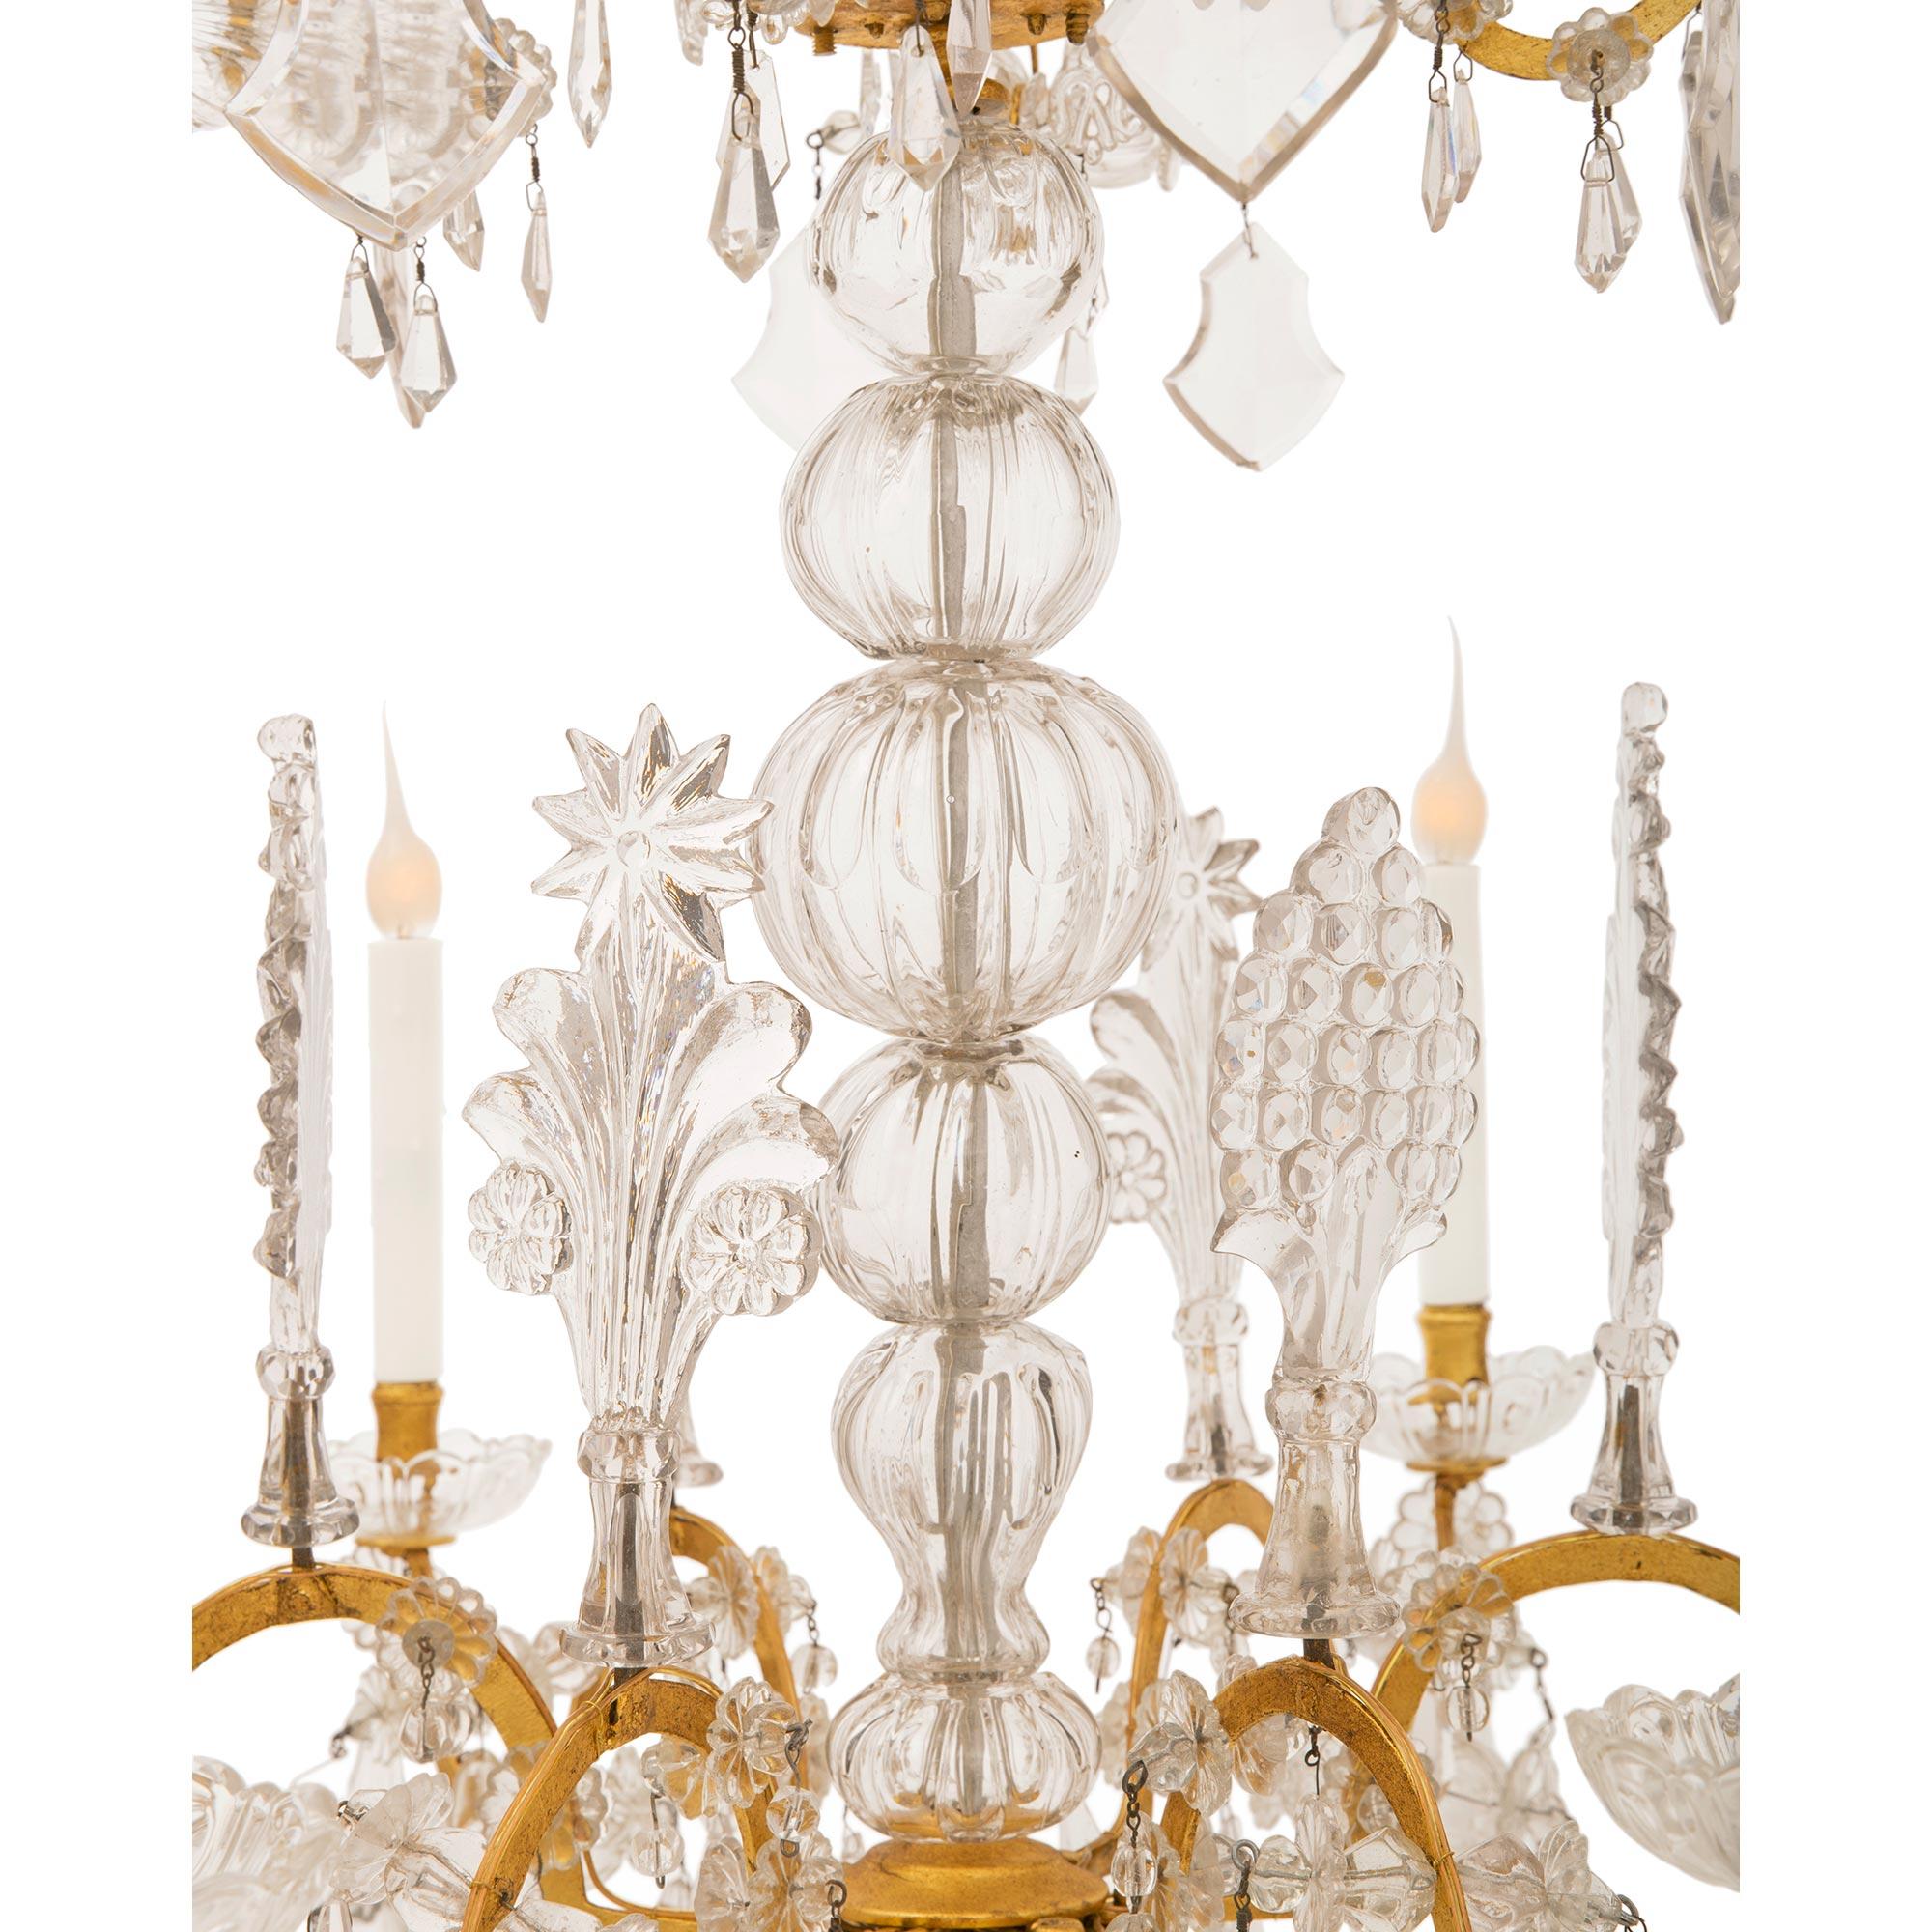 Pair Of Italian 18th Century Venetian St. Gilt Metal And Crystal Chandeliers For Sale 1